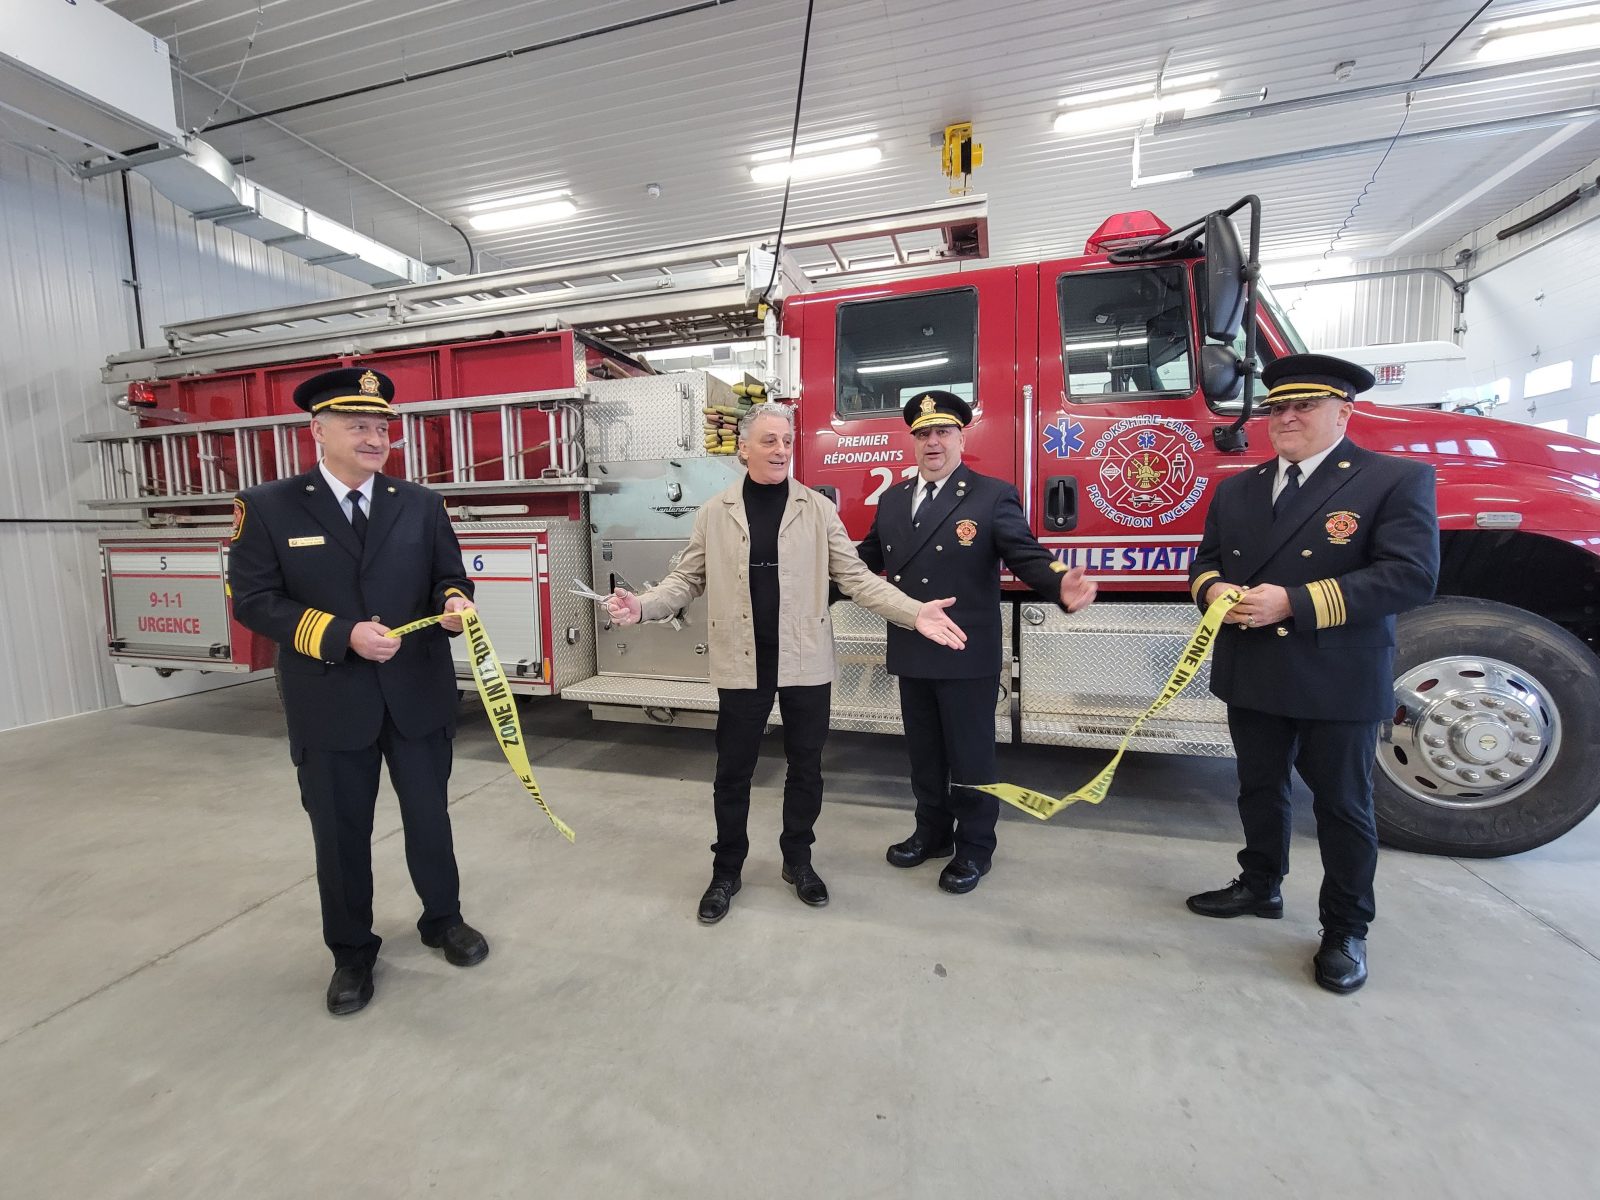 A new fire station for Sawyerville